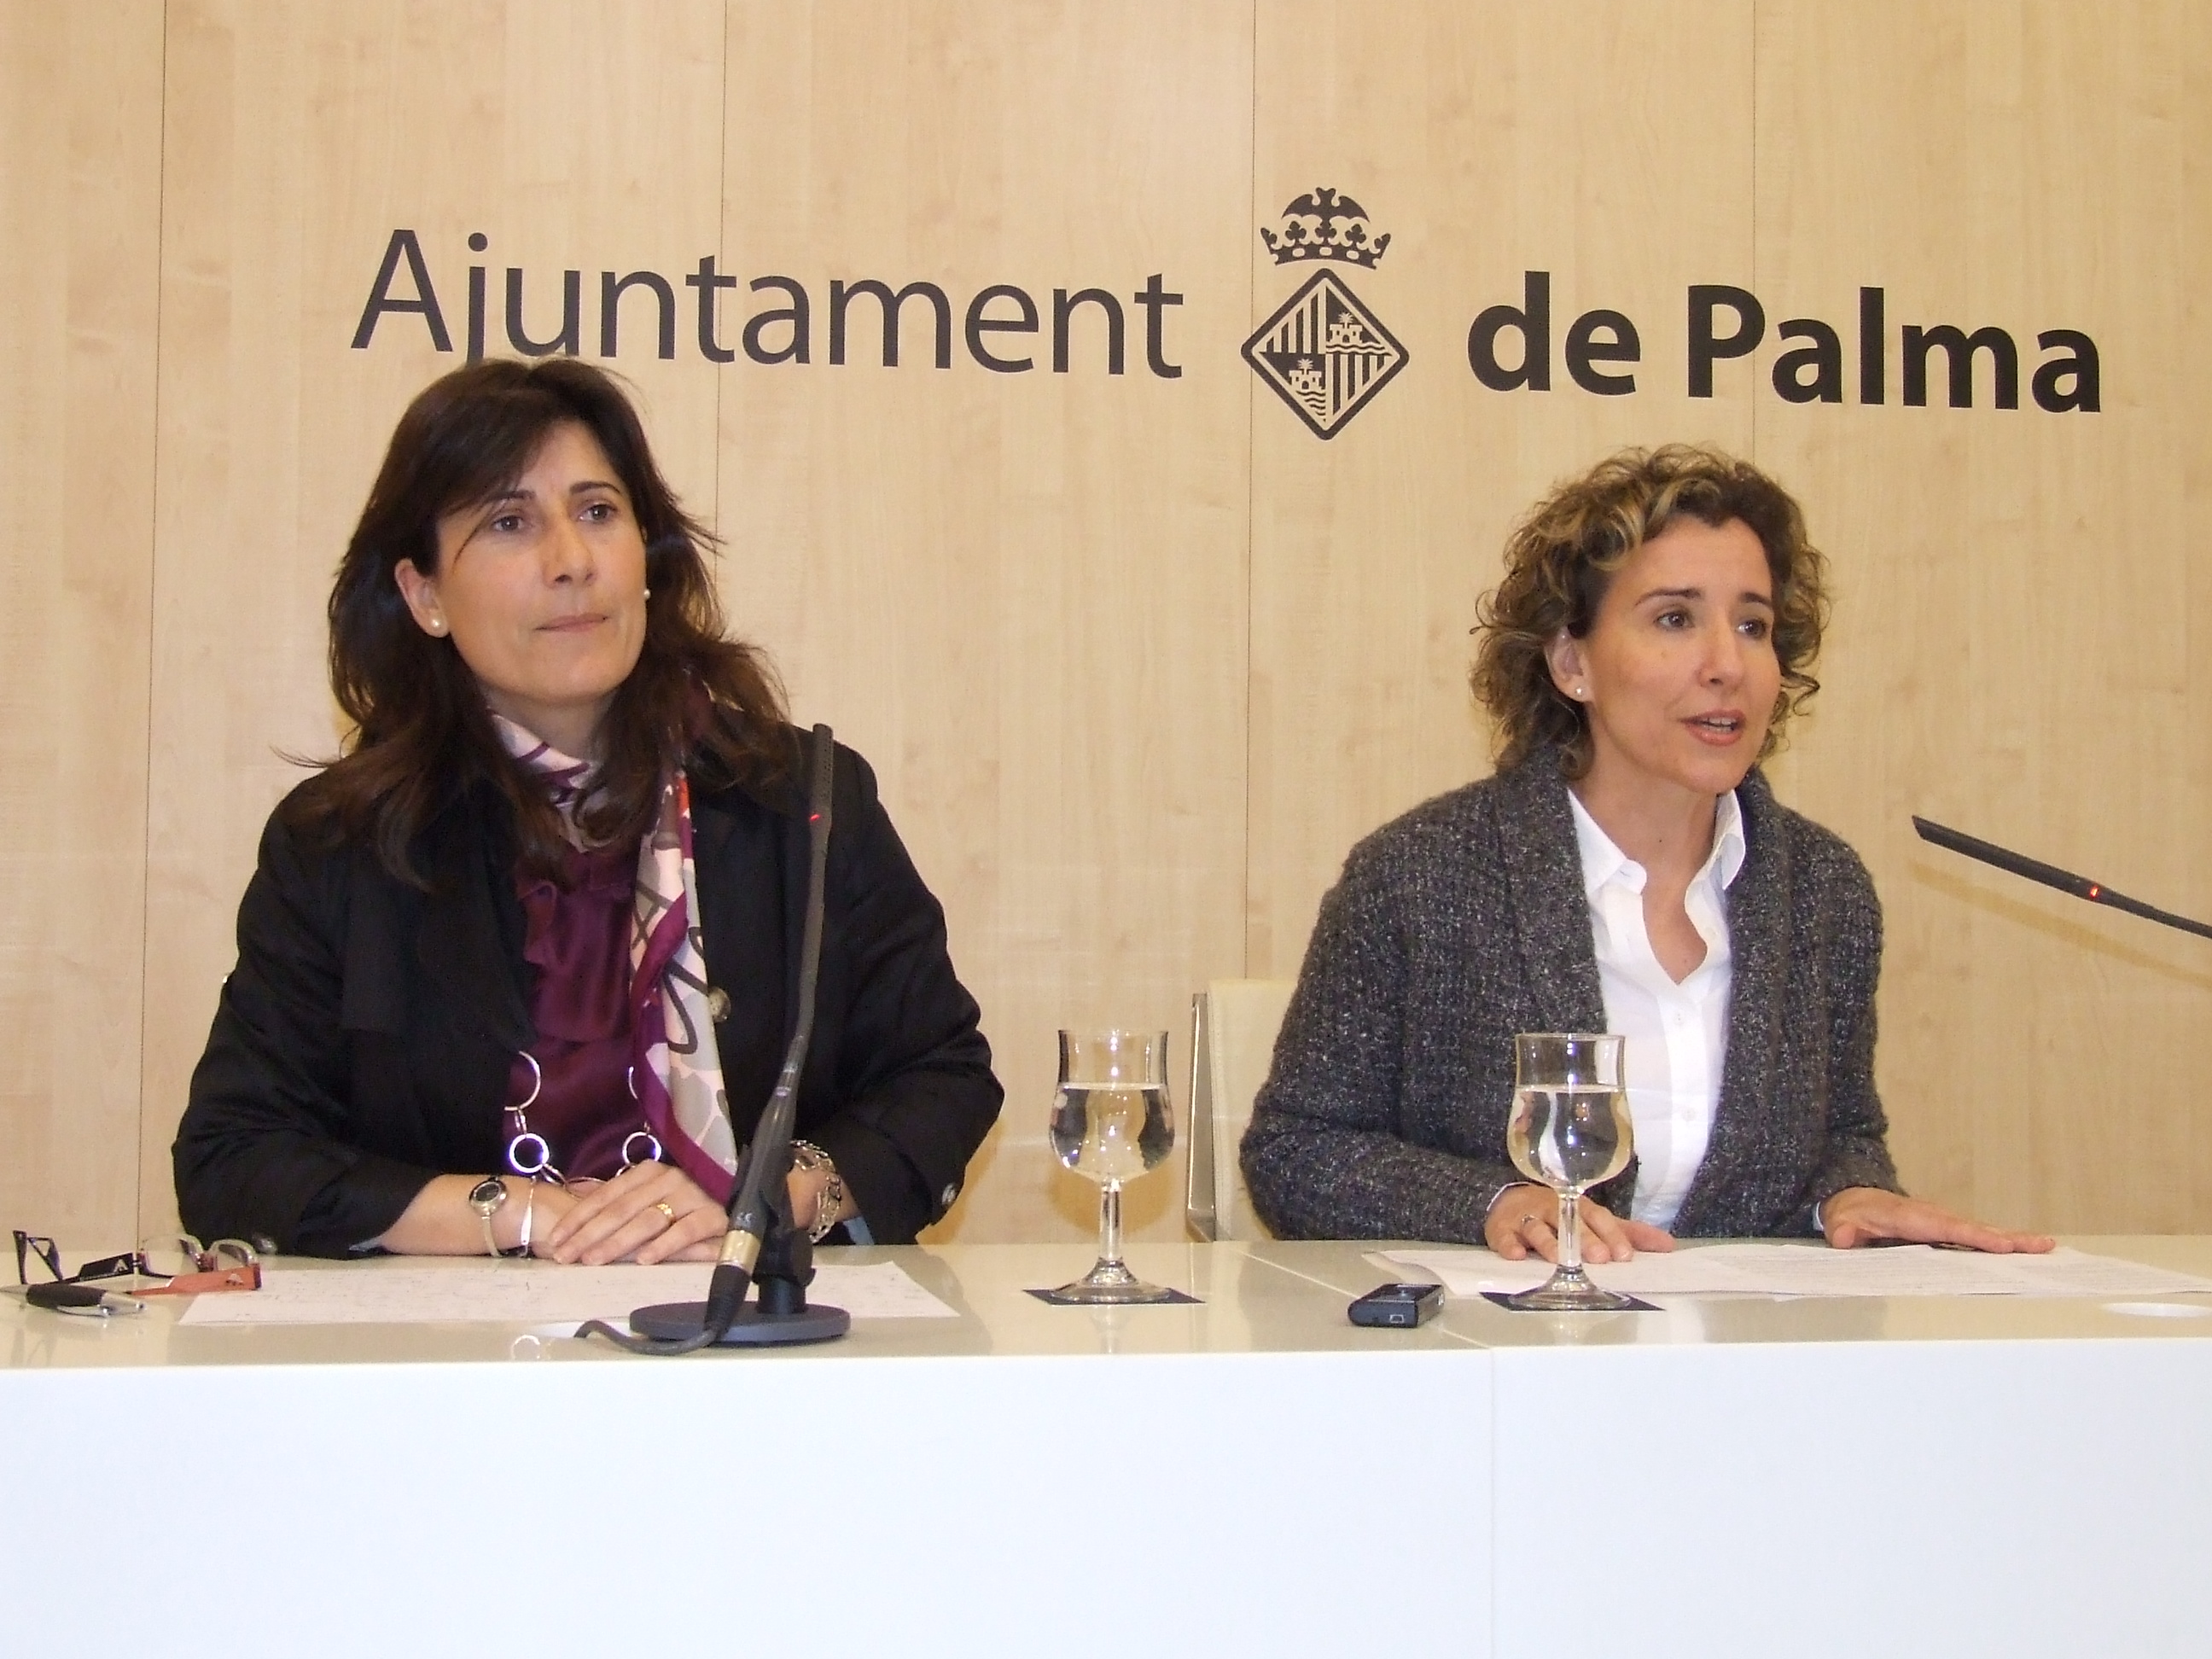 The Defence Department and the City Council of Palma reach an agreement to reduce by half the number of planned dwelling units in Son Busquets 